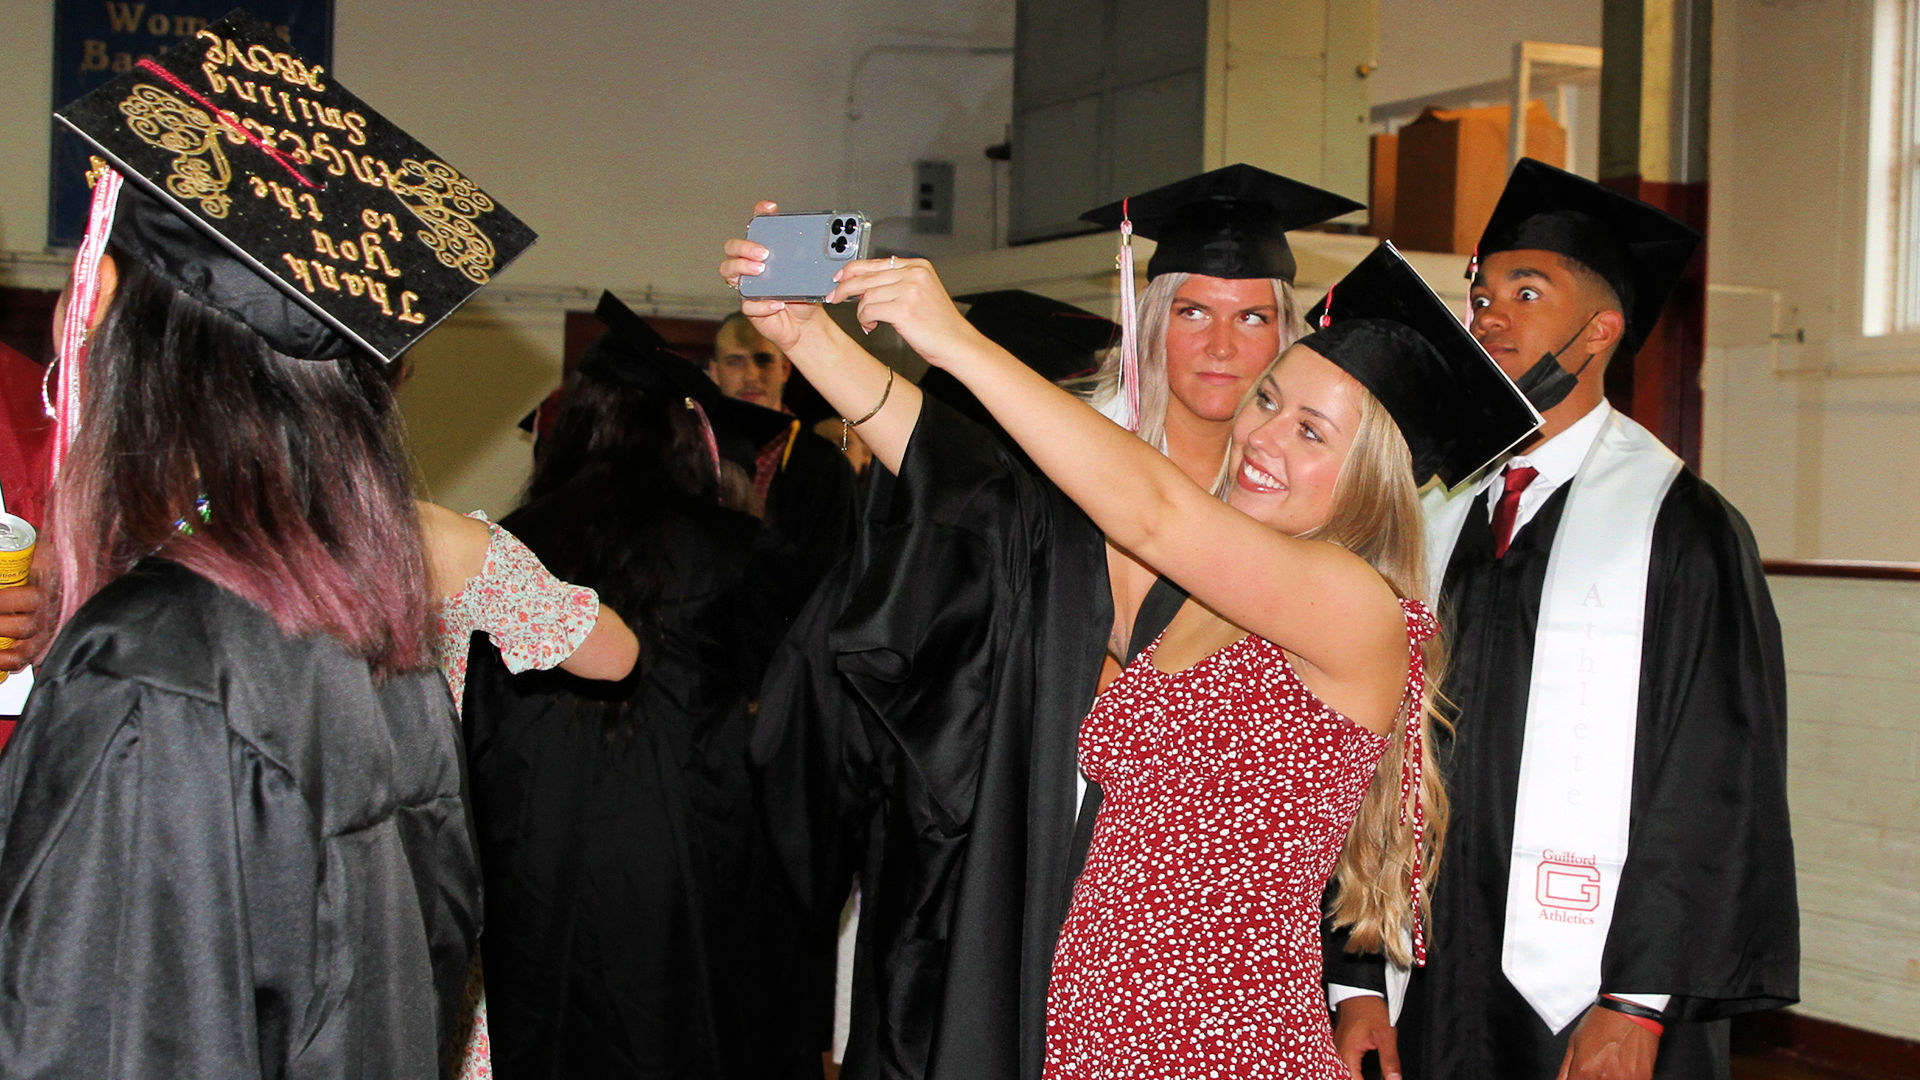 Three students take a group selfie before Commencement.